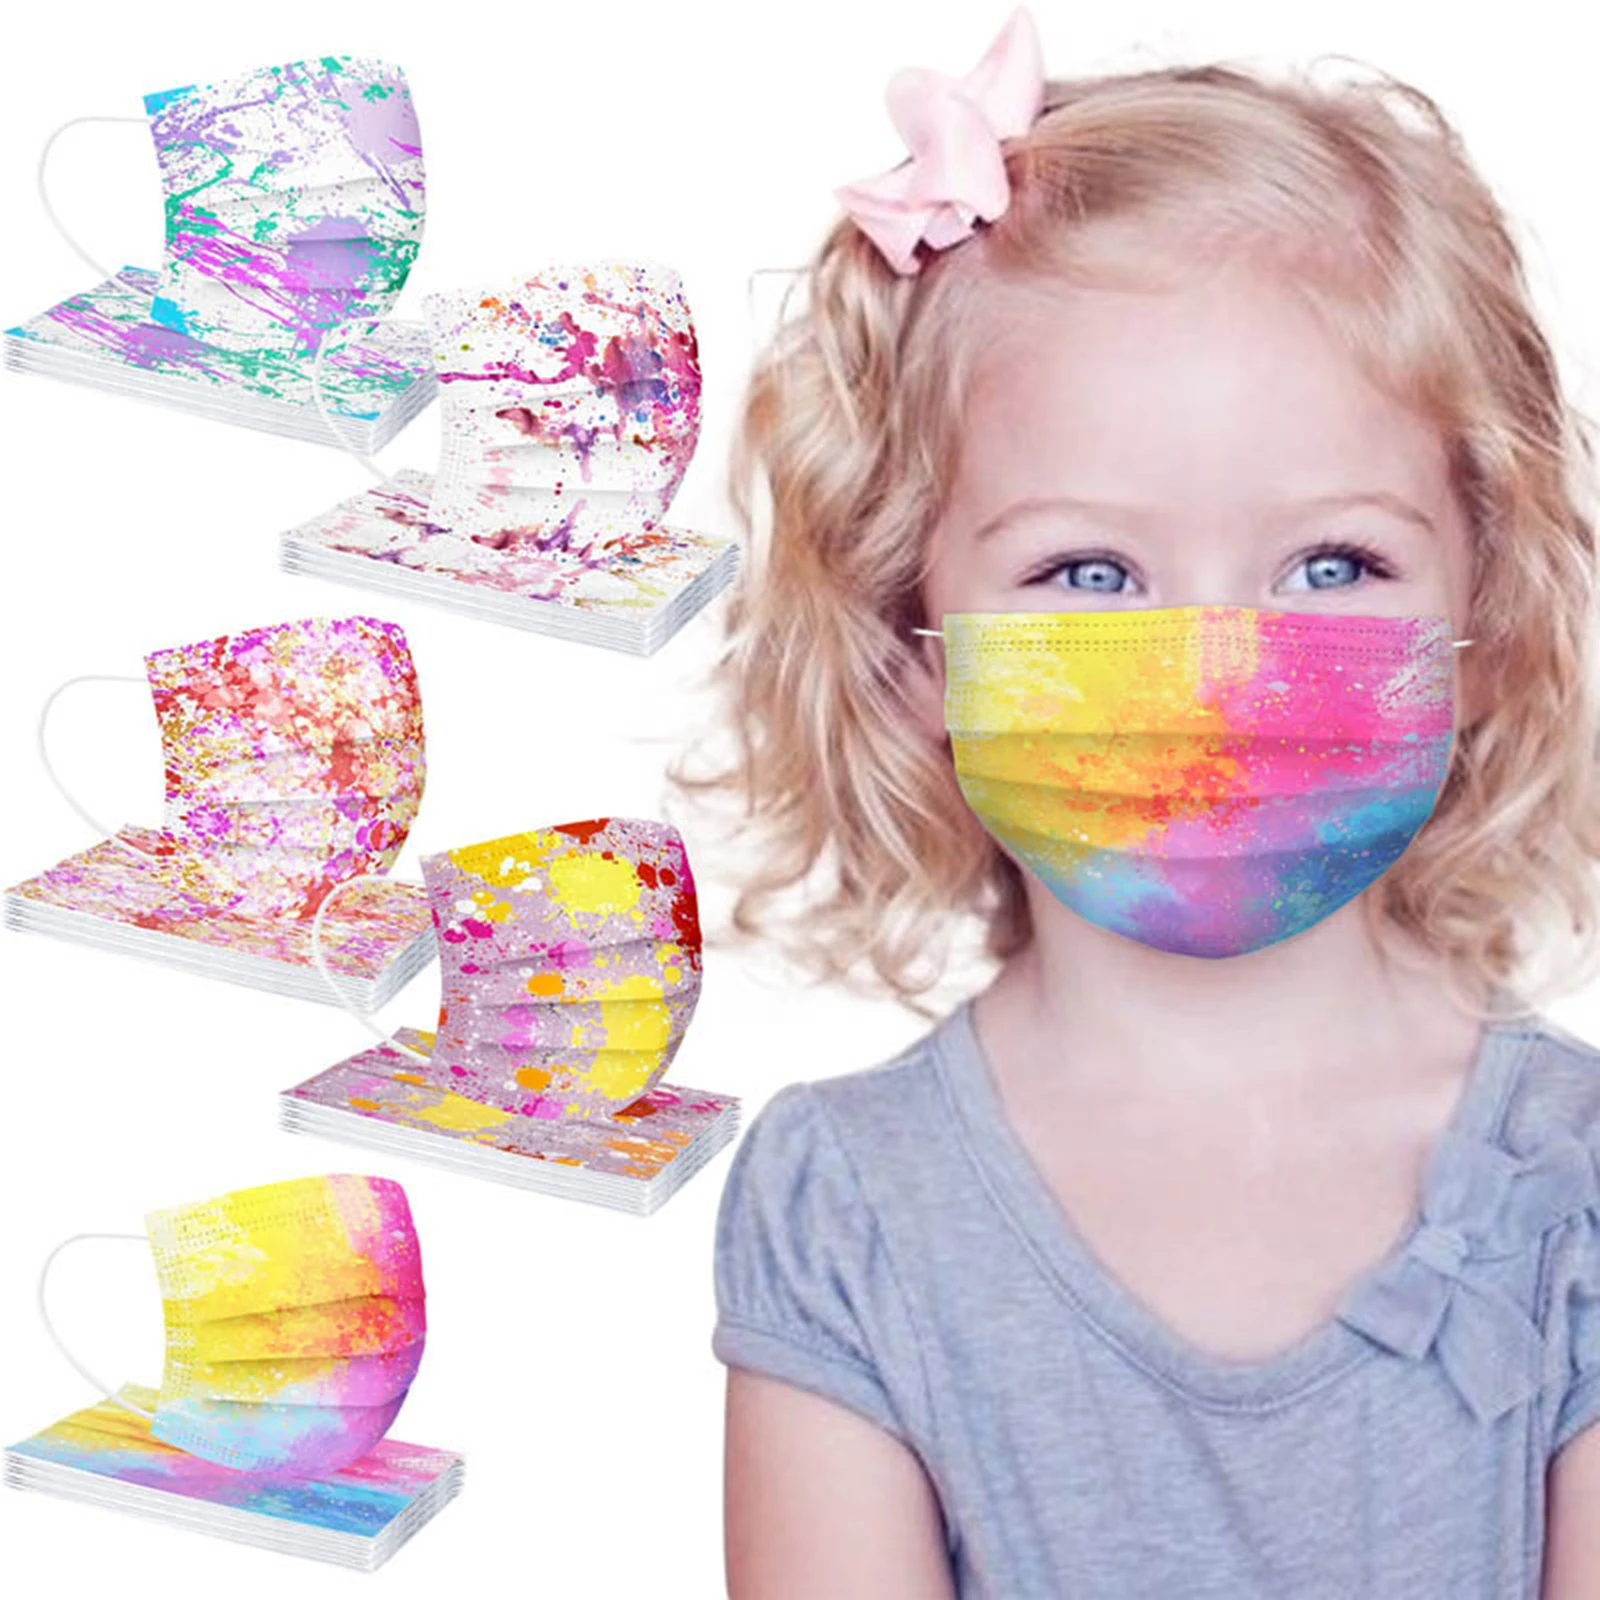 

10pcs Children Disposable Mask Colorful Tie Dyed 3 Layers Meltblown Masks for Child Girls Cosplay Party Halloween Decoratition